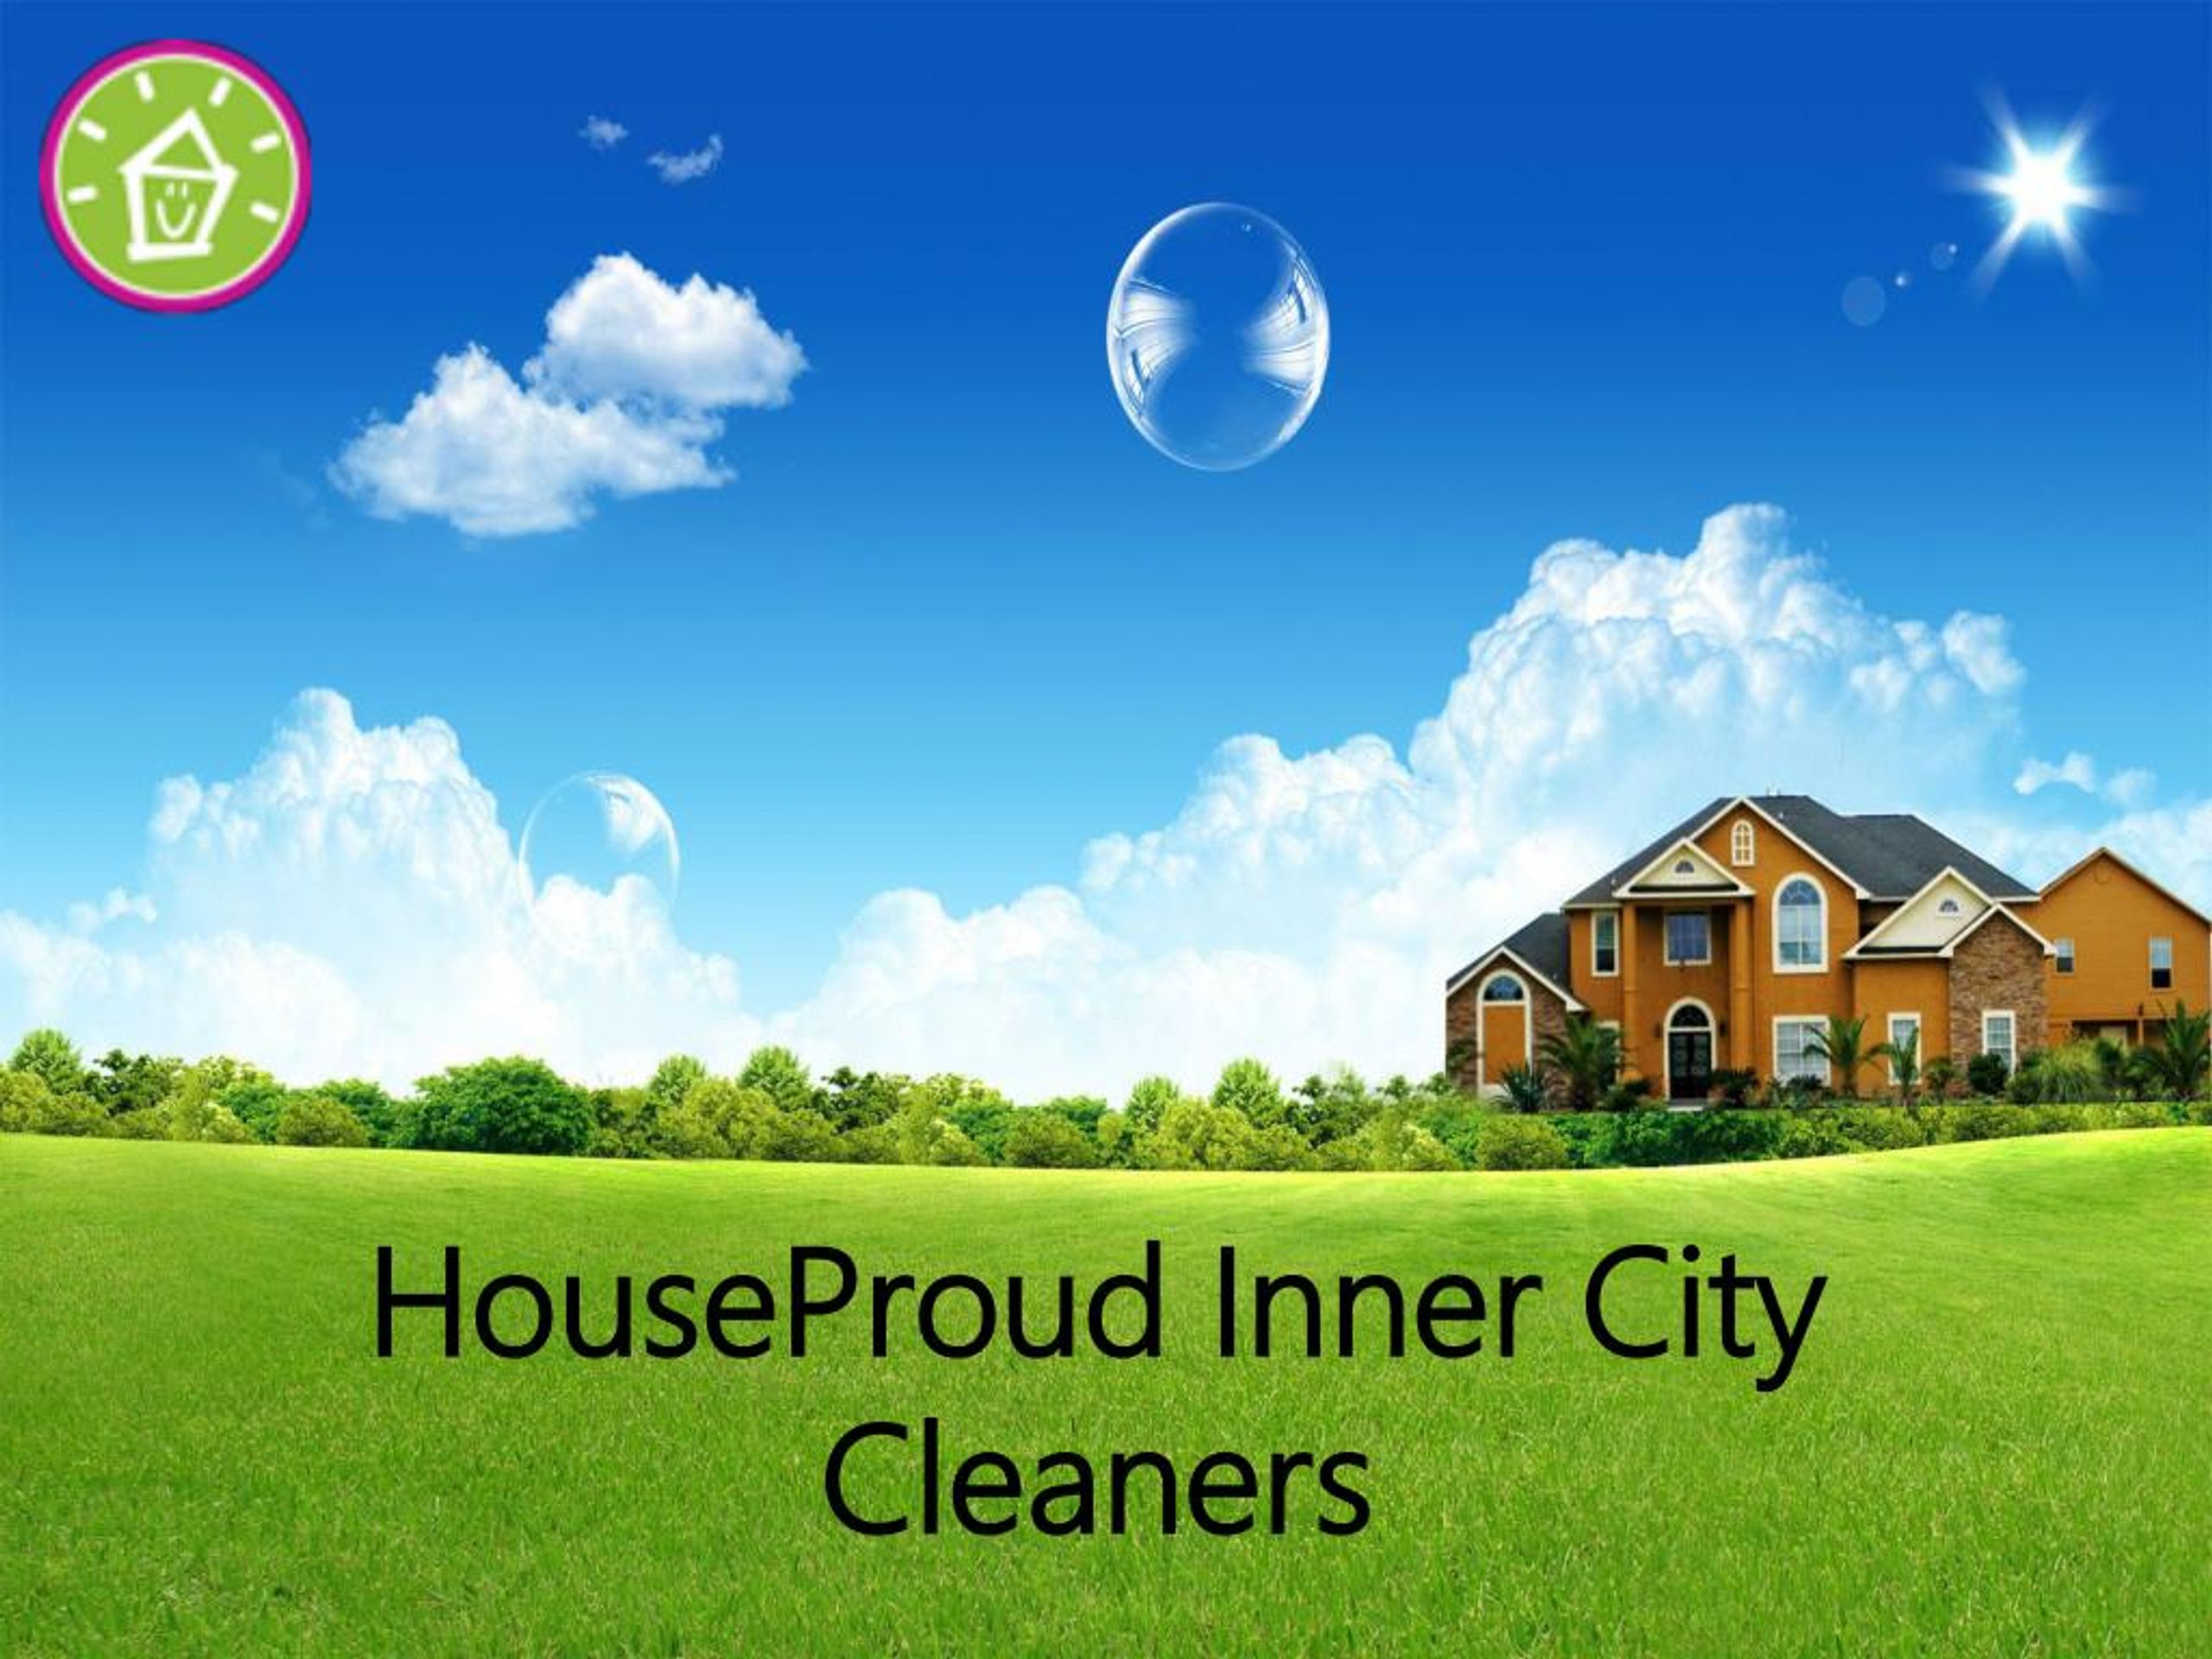 PPT - HouseProud Inner City Cleaners PowerPoint Presentation, free ...